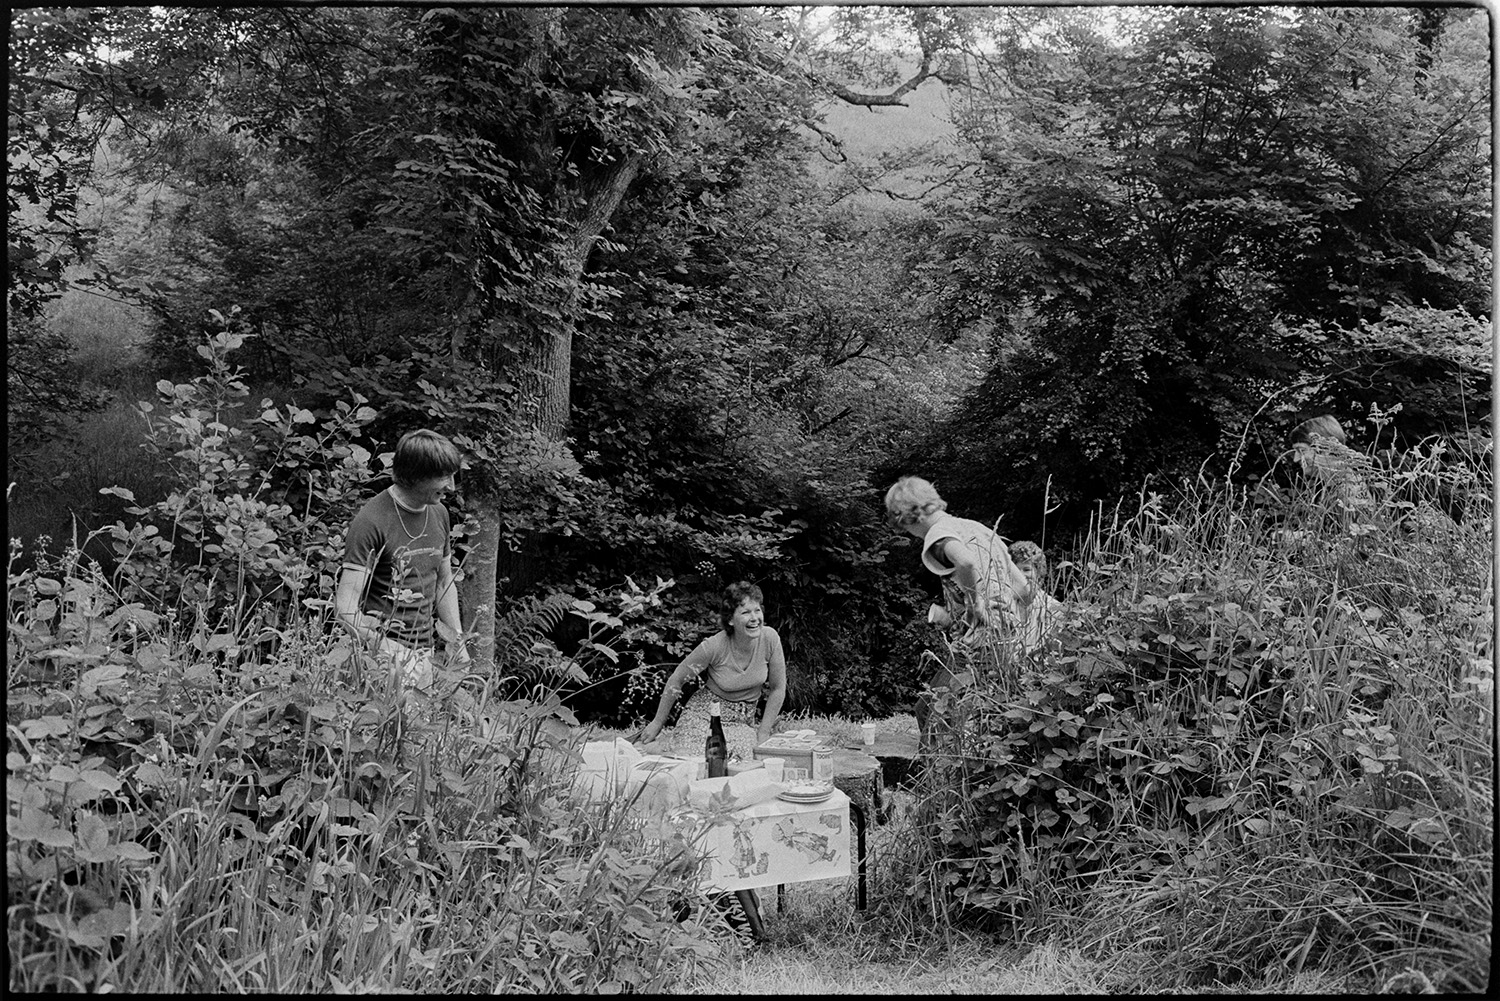 People picnicking in wood beside stream. 
[Women and a man having a picnic in a small clearing by a stream in Dolton Wood. Food and drink are laid out on a small table and tree stumps.]